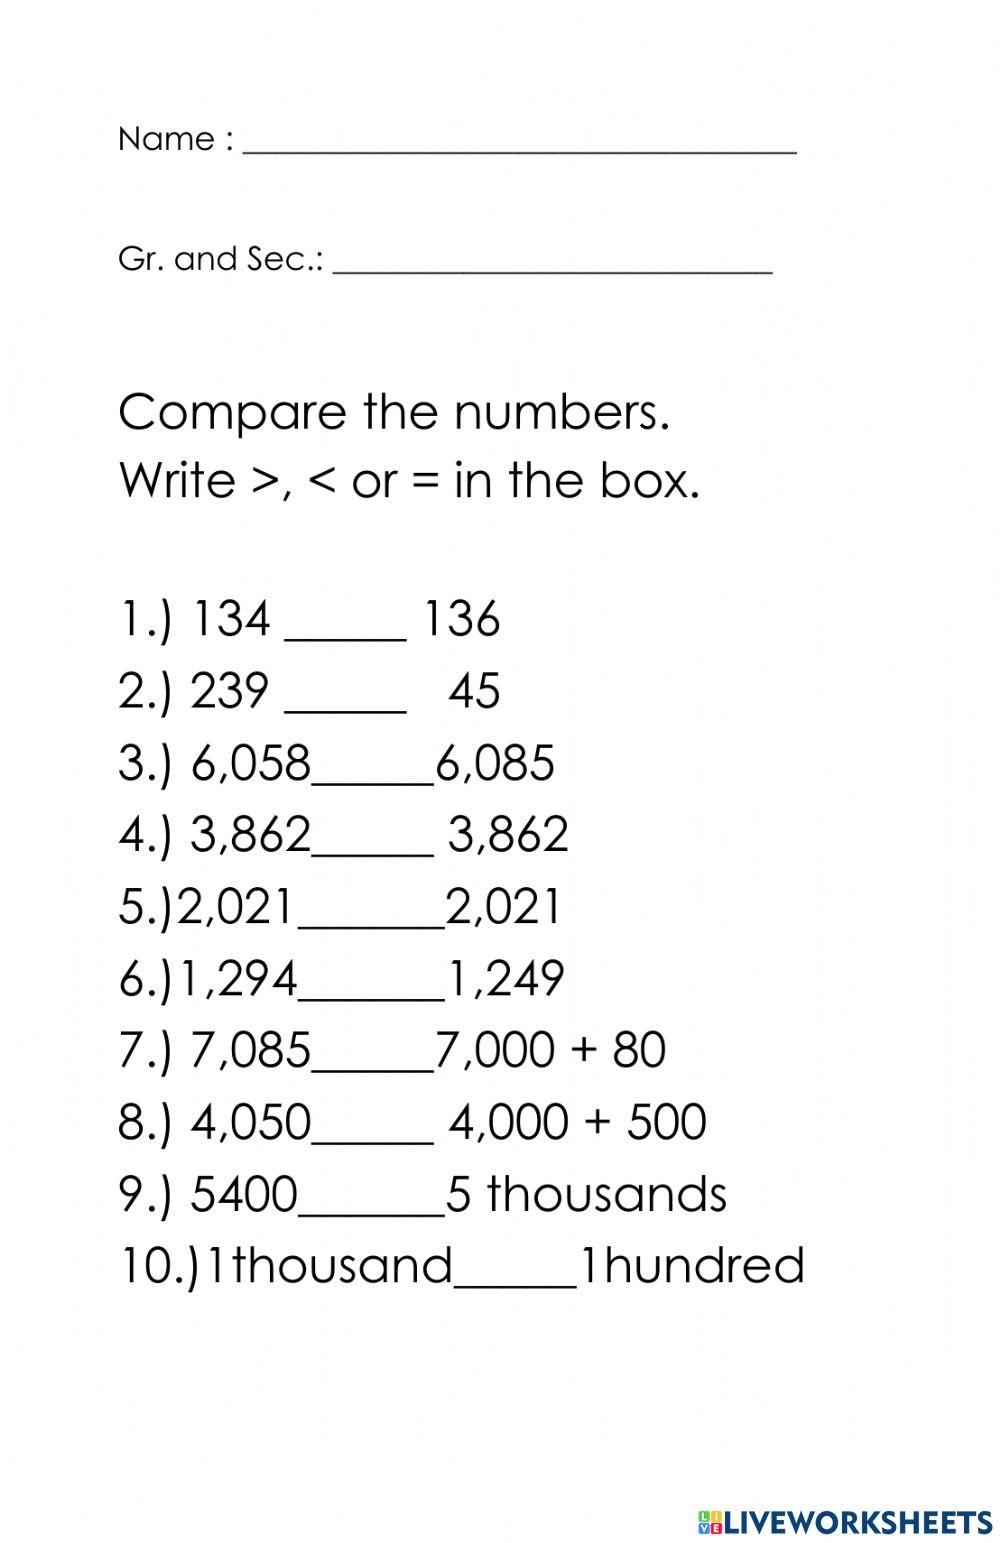 Comparing Numbers up to Thousands